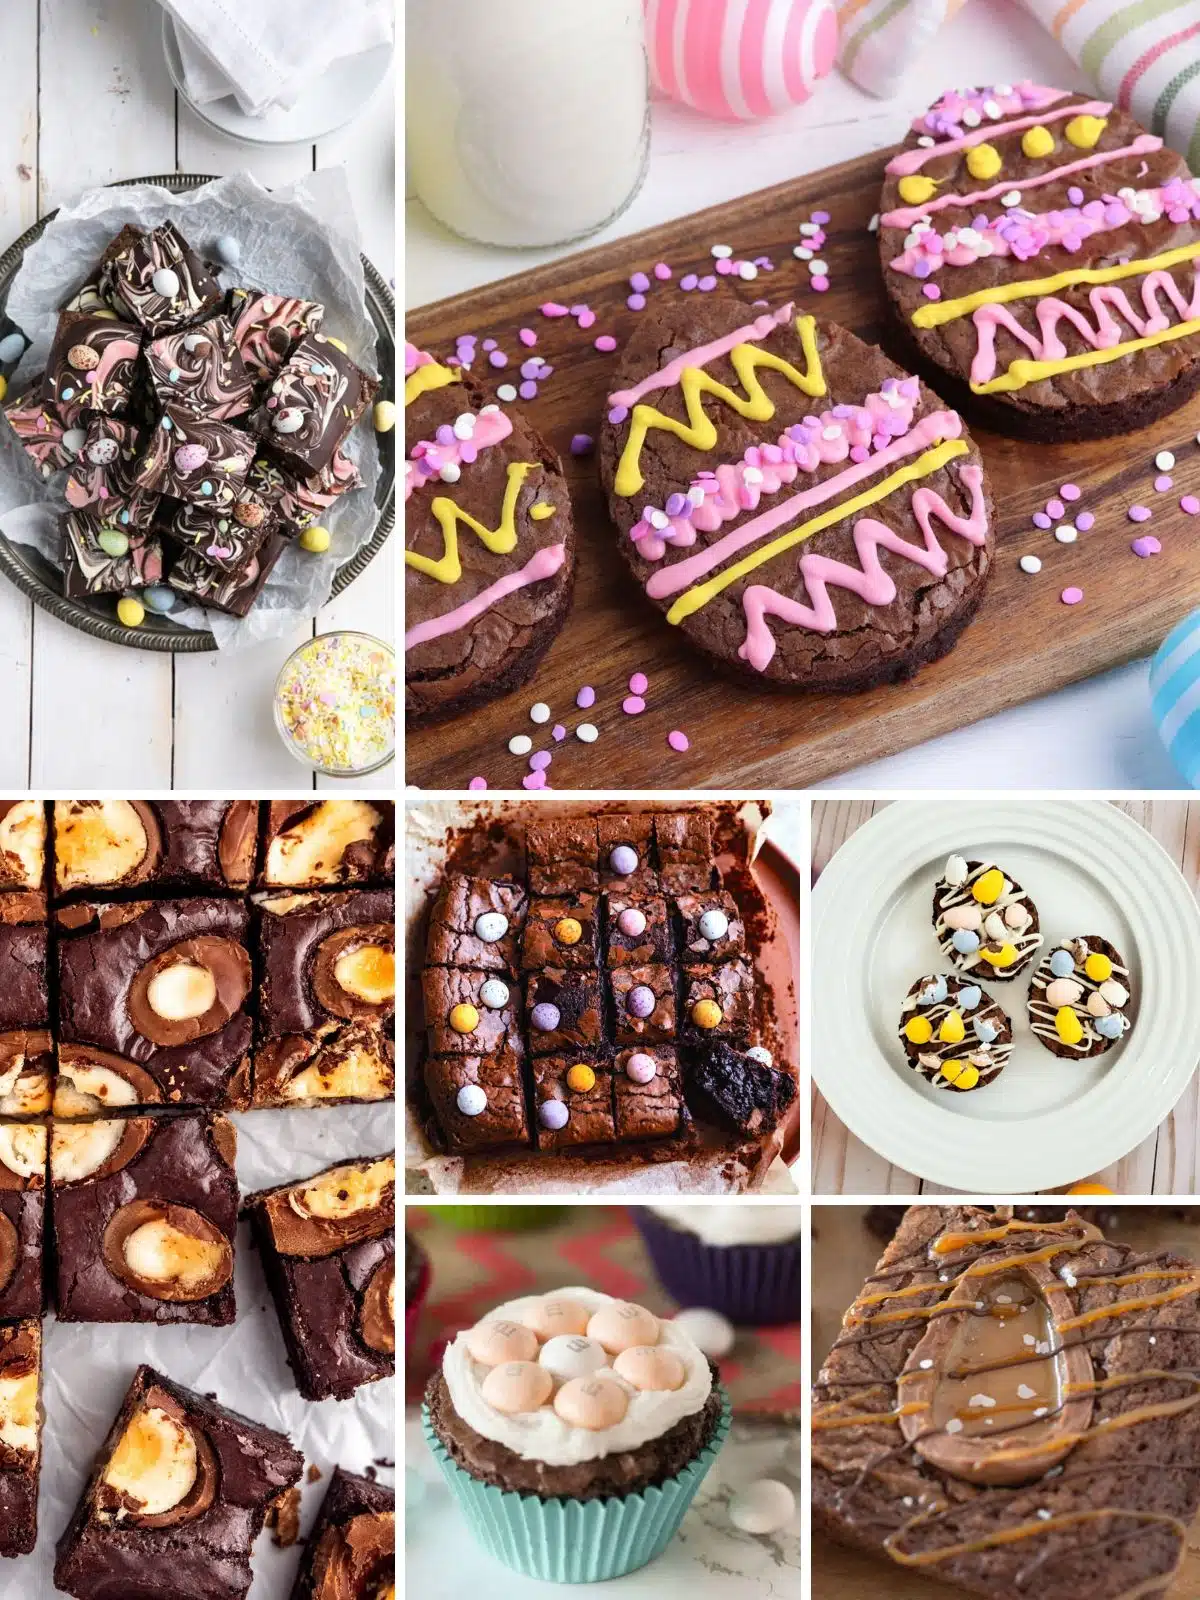 Easy brownie recipes decorated for Easter.